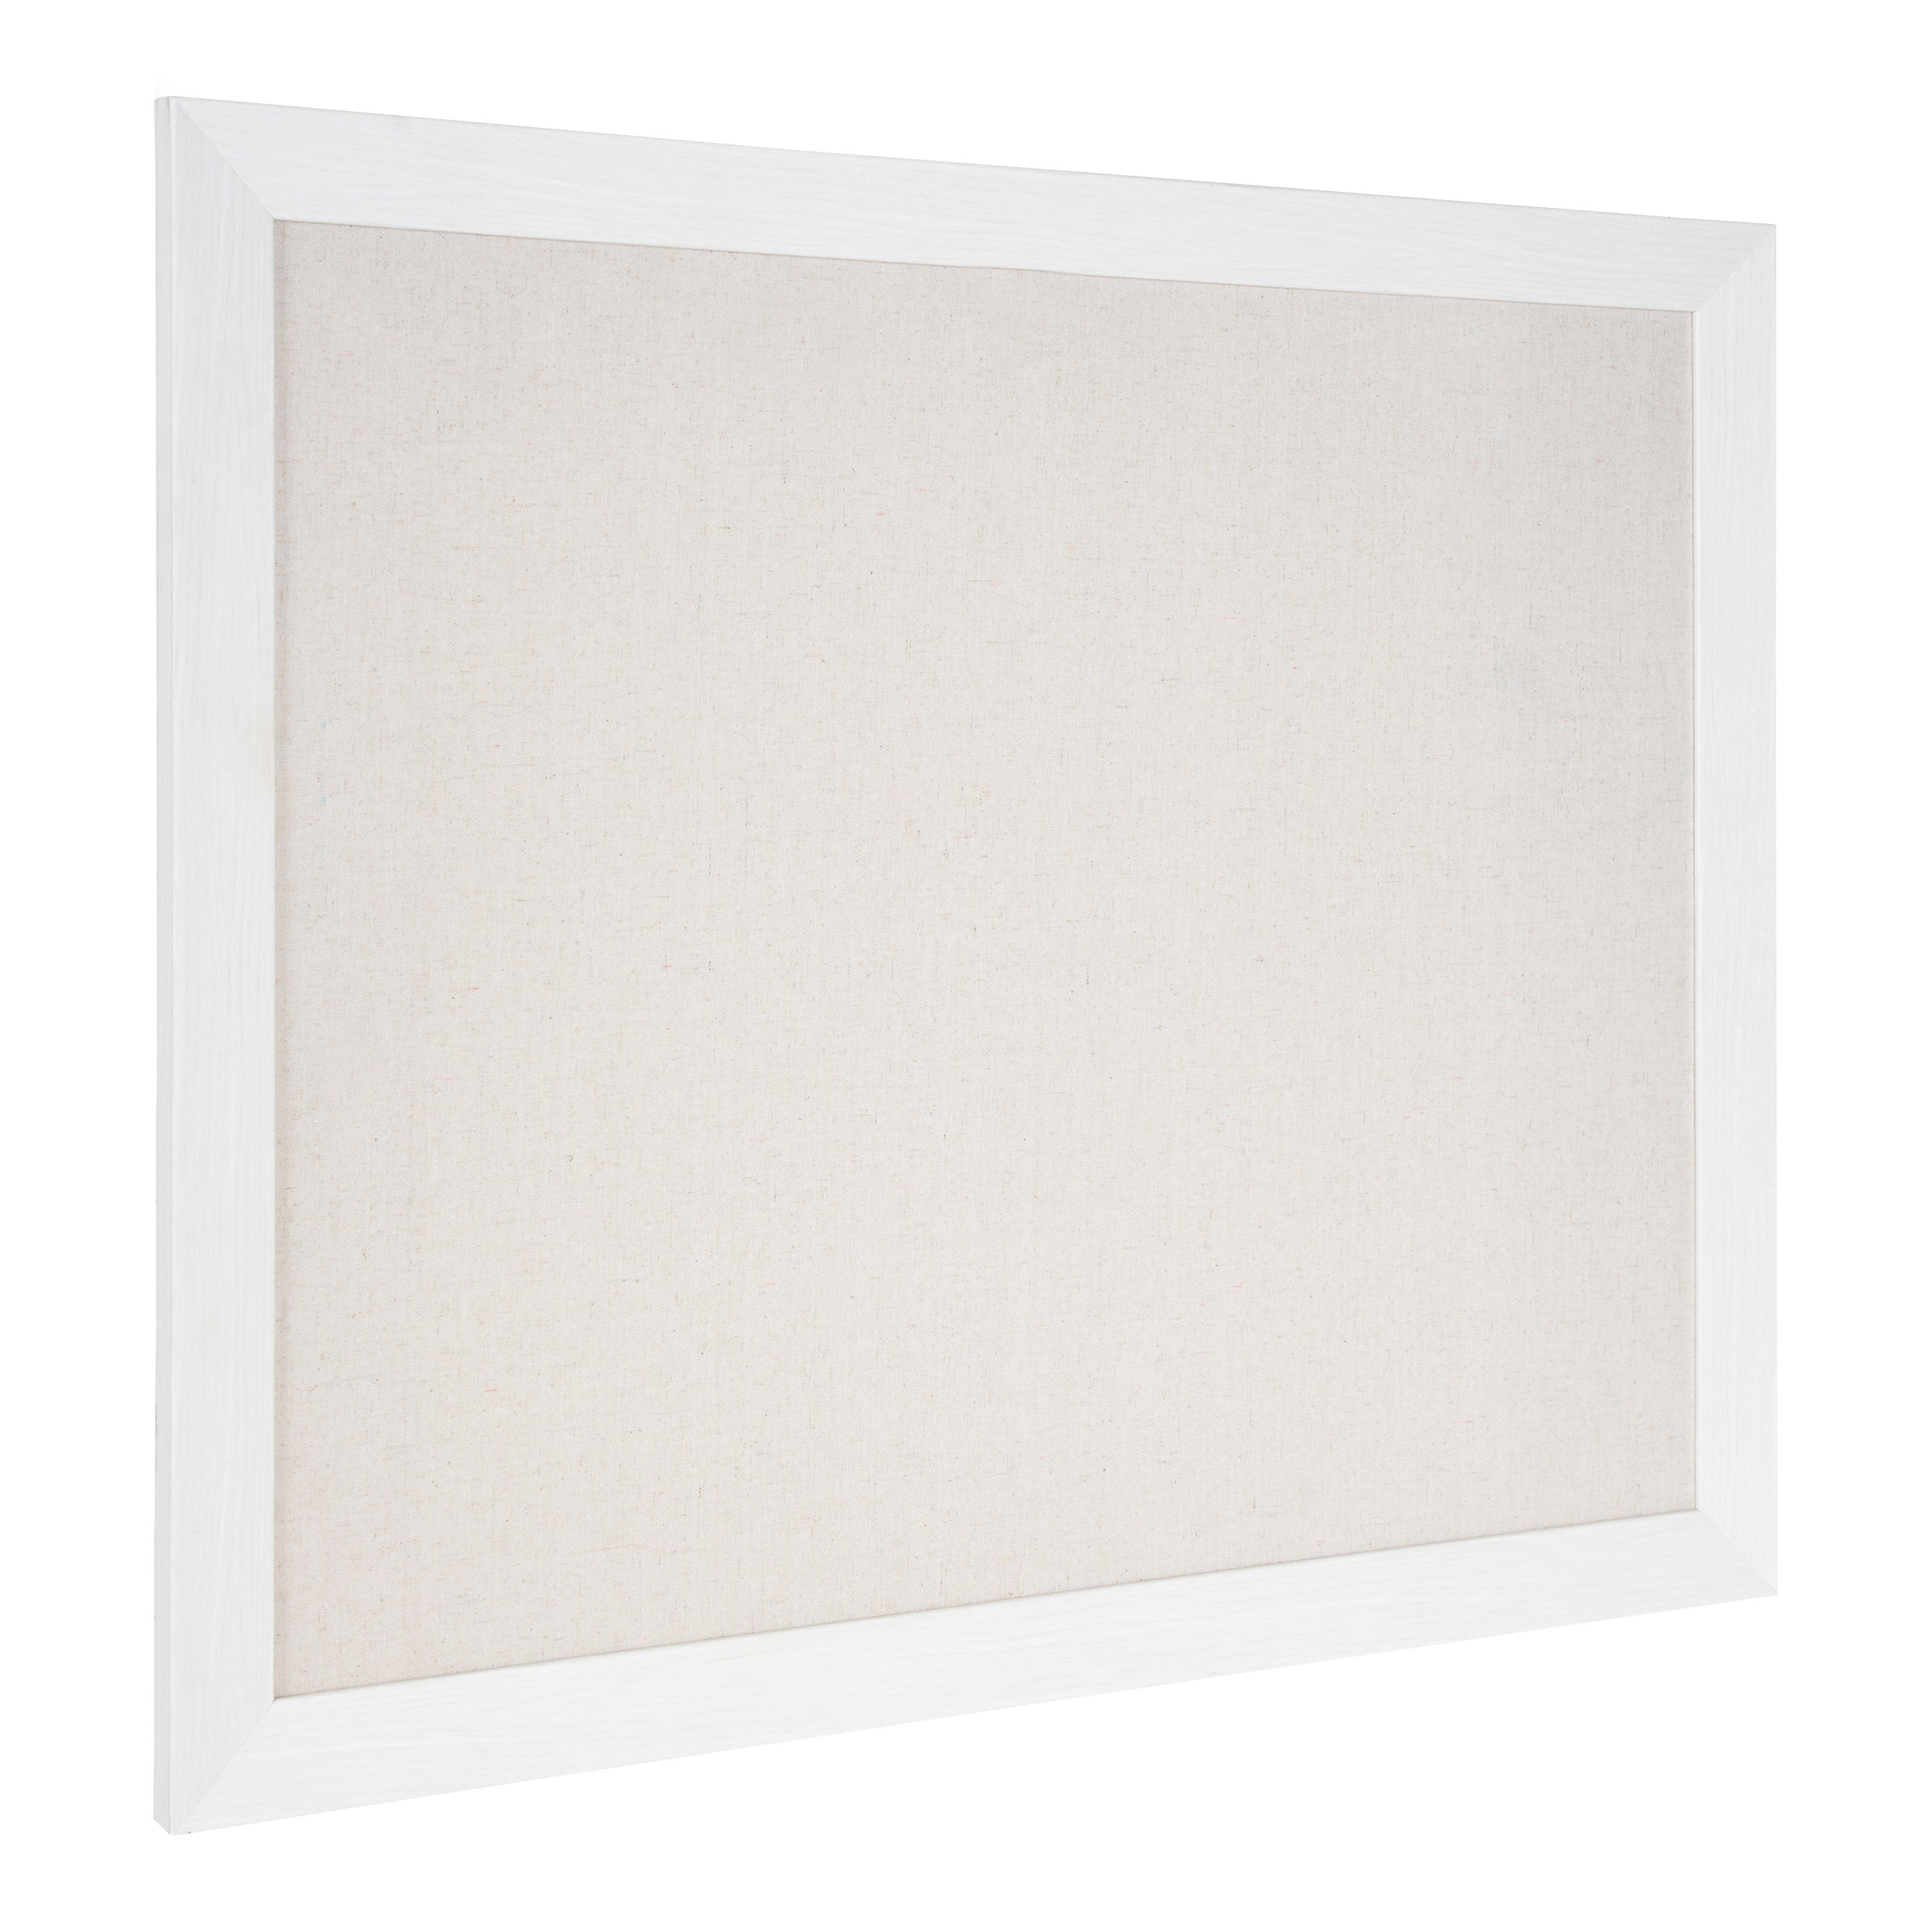 Beatrice Framed Linen Fabric Pinboard